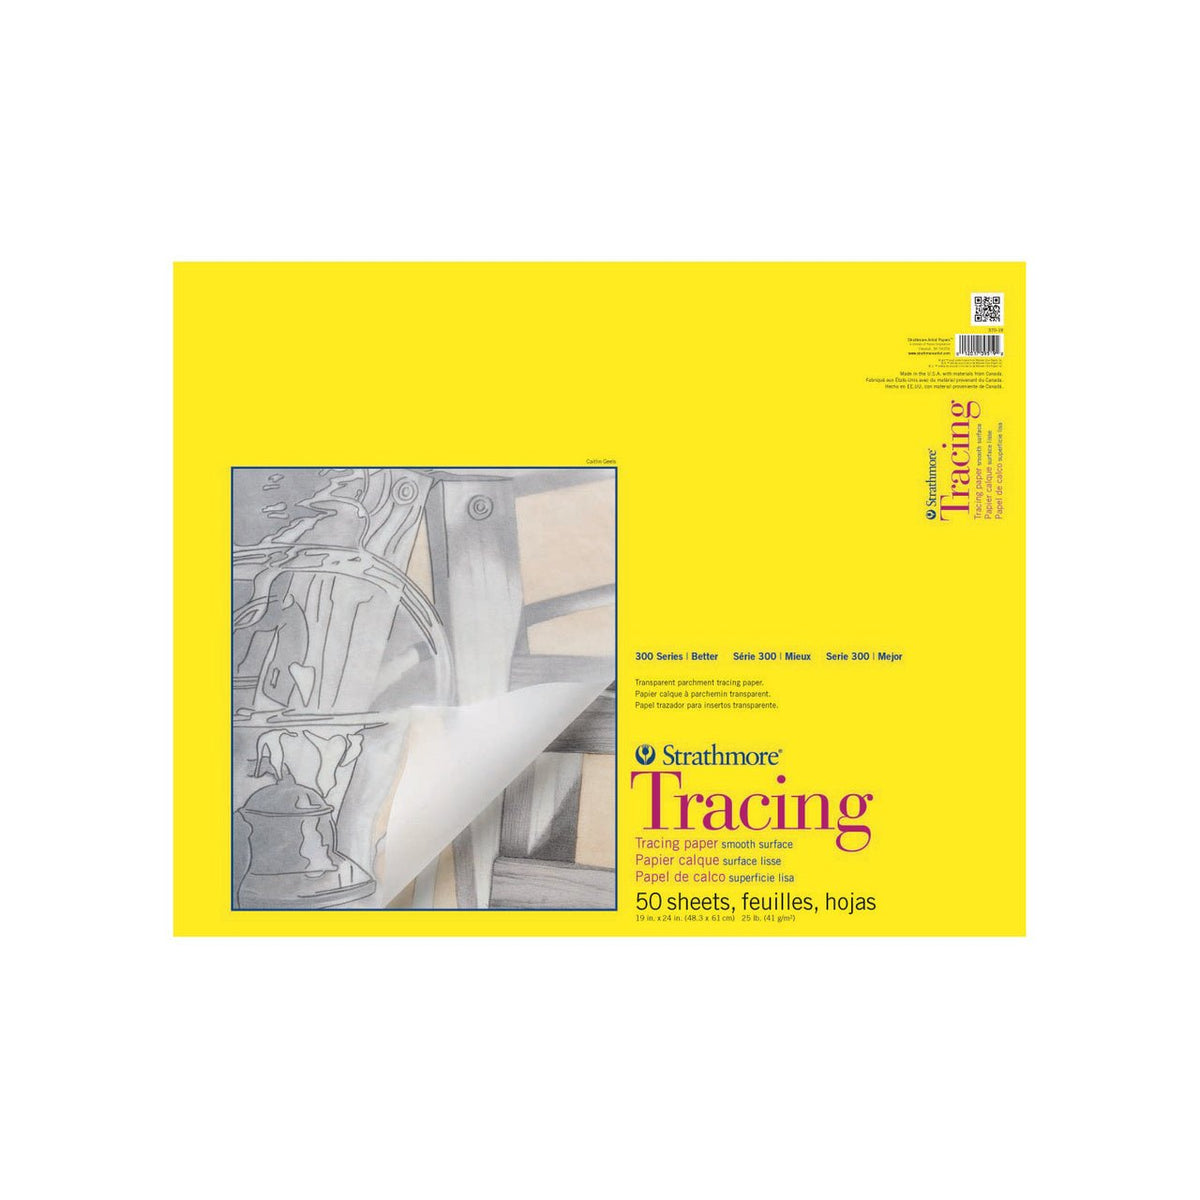 Strathmore 300 Series Tracing Paper 25 lb - 50 Sheets 19X24 - merriartist.com